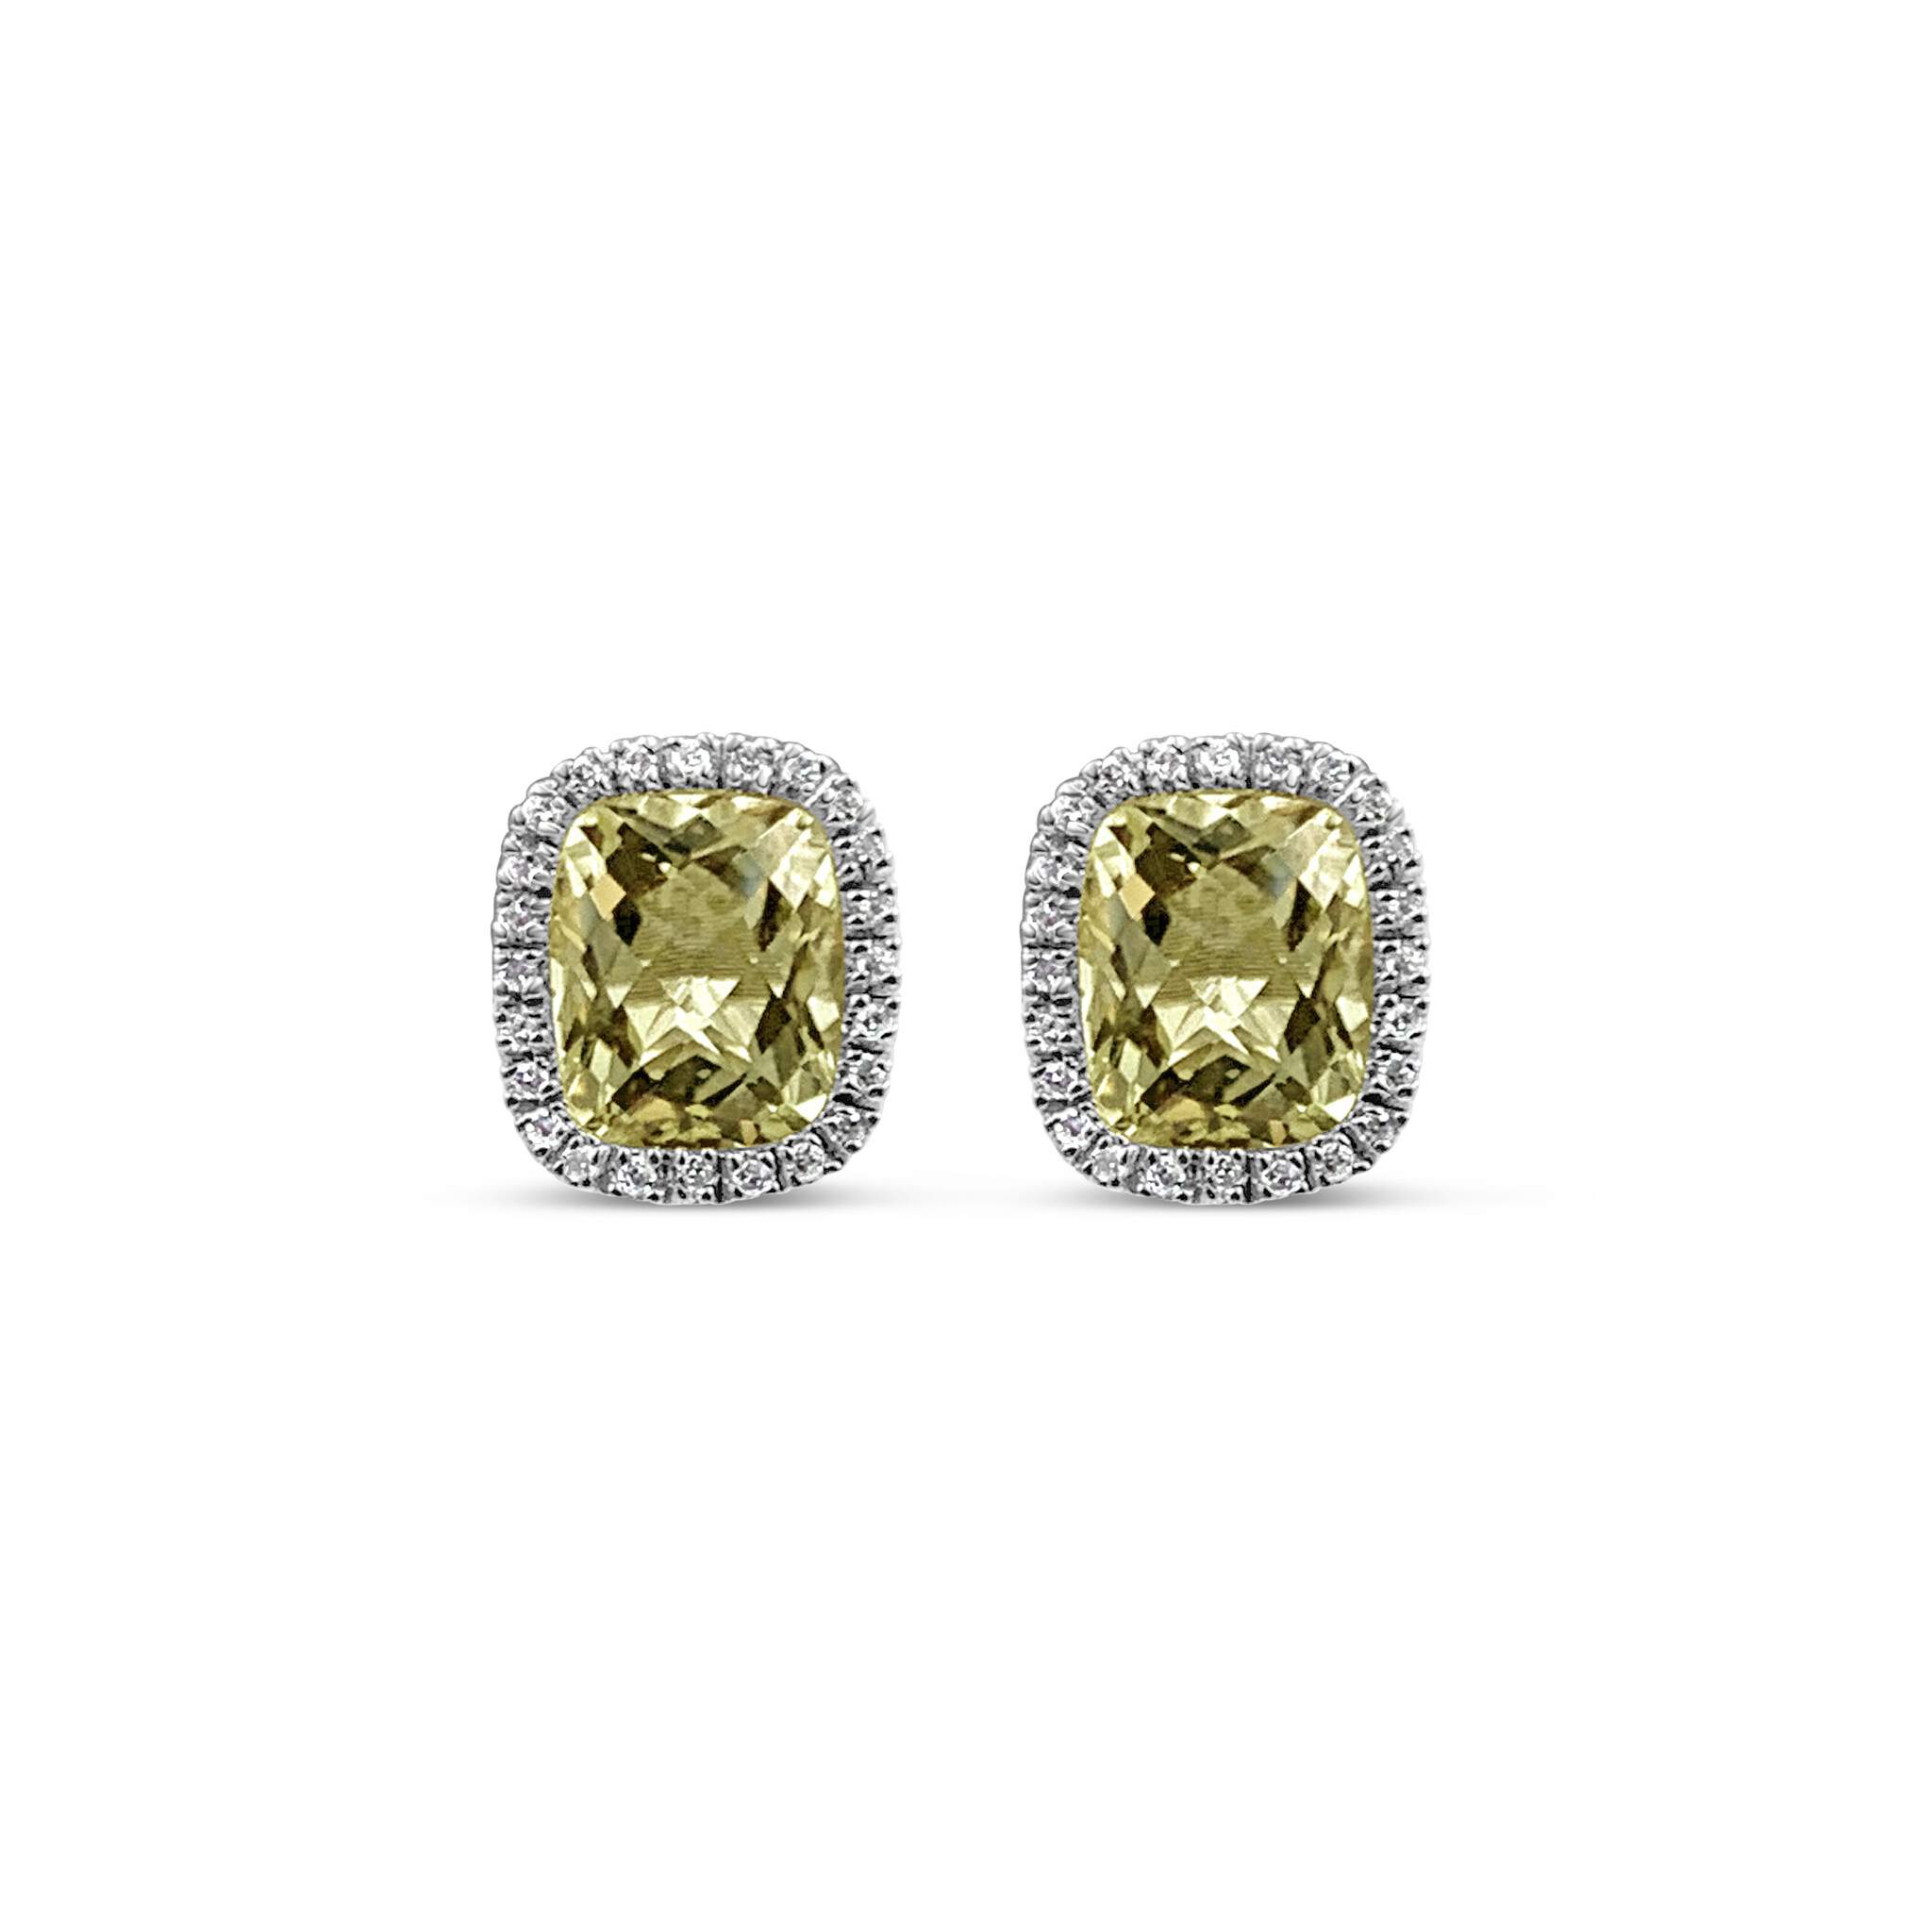 18k white gold earrings with 0.50ct diamonds & 11,80ct citrine